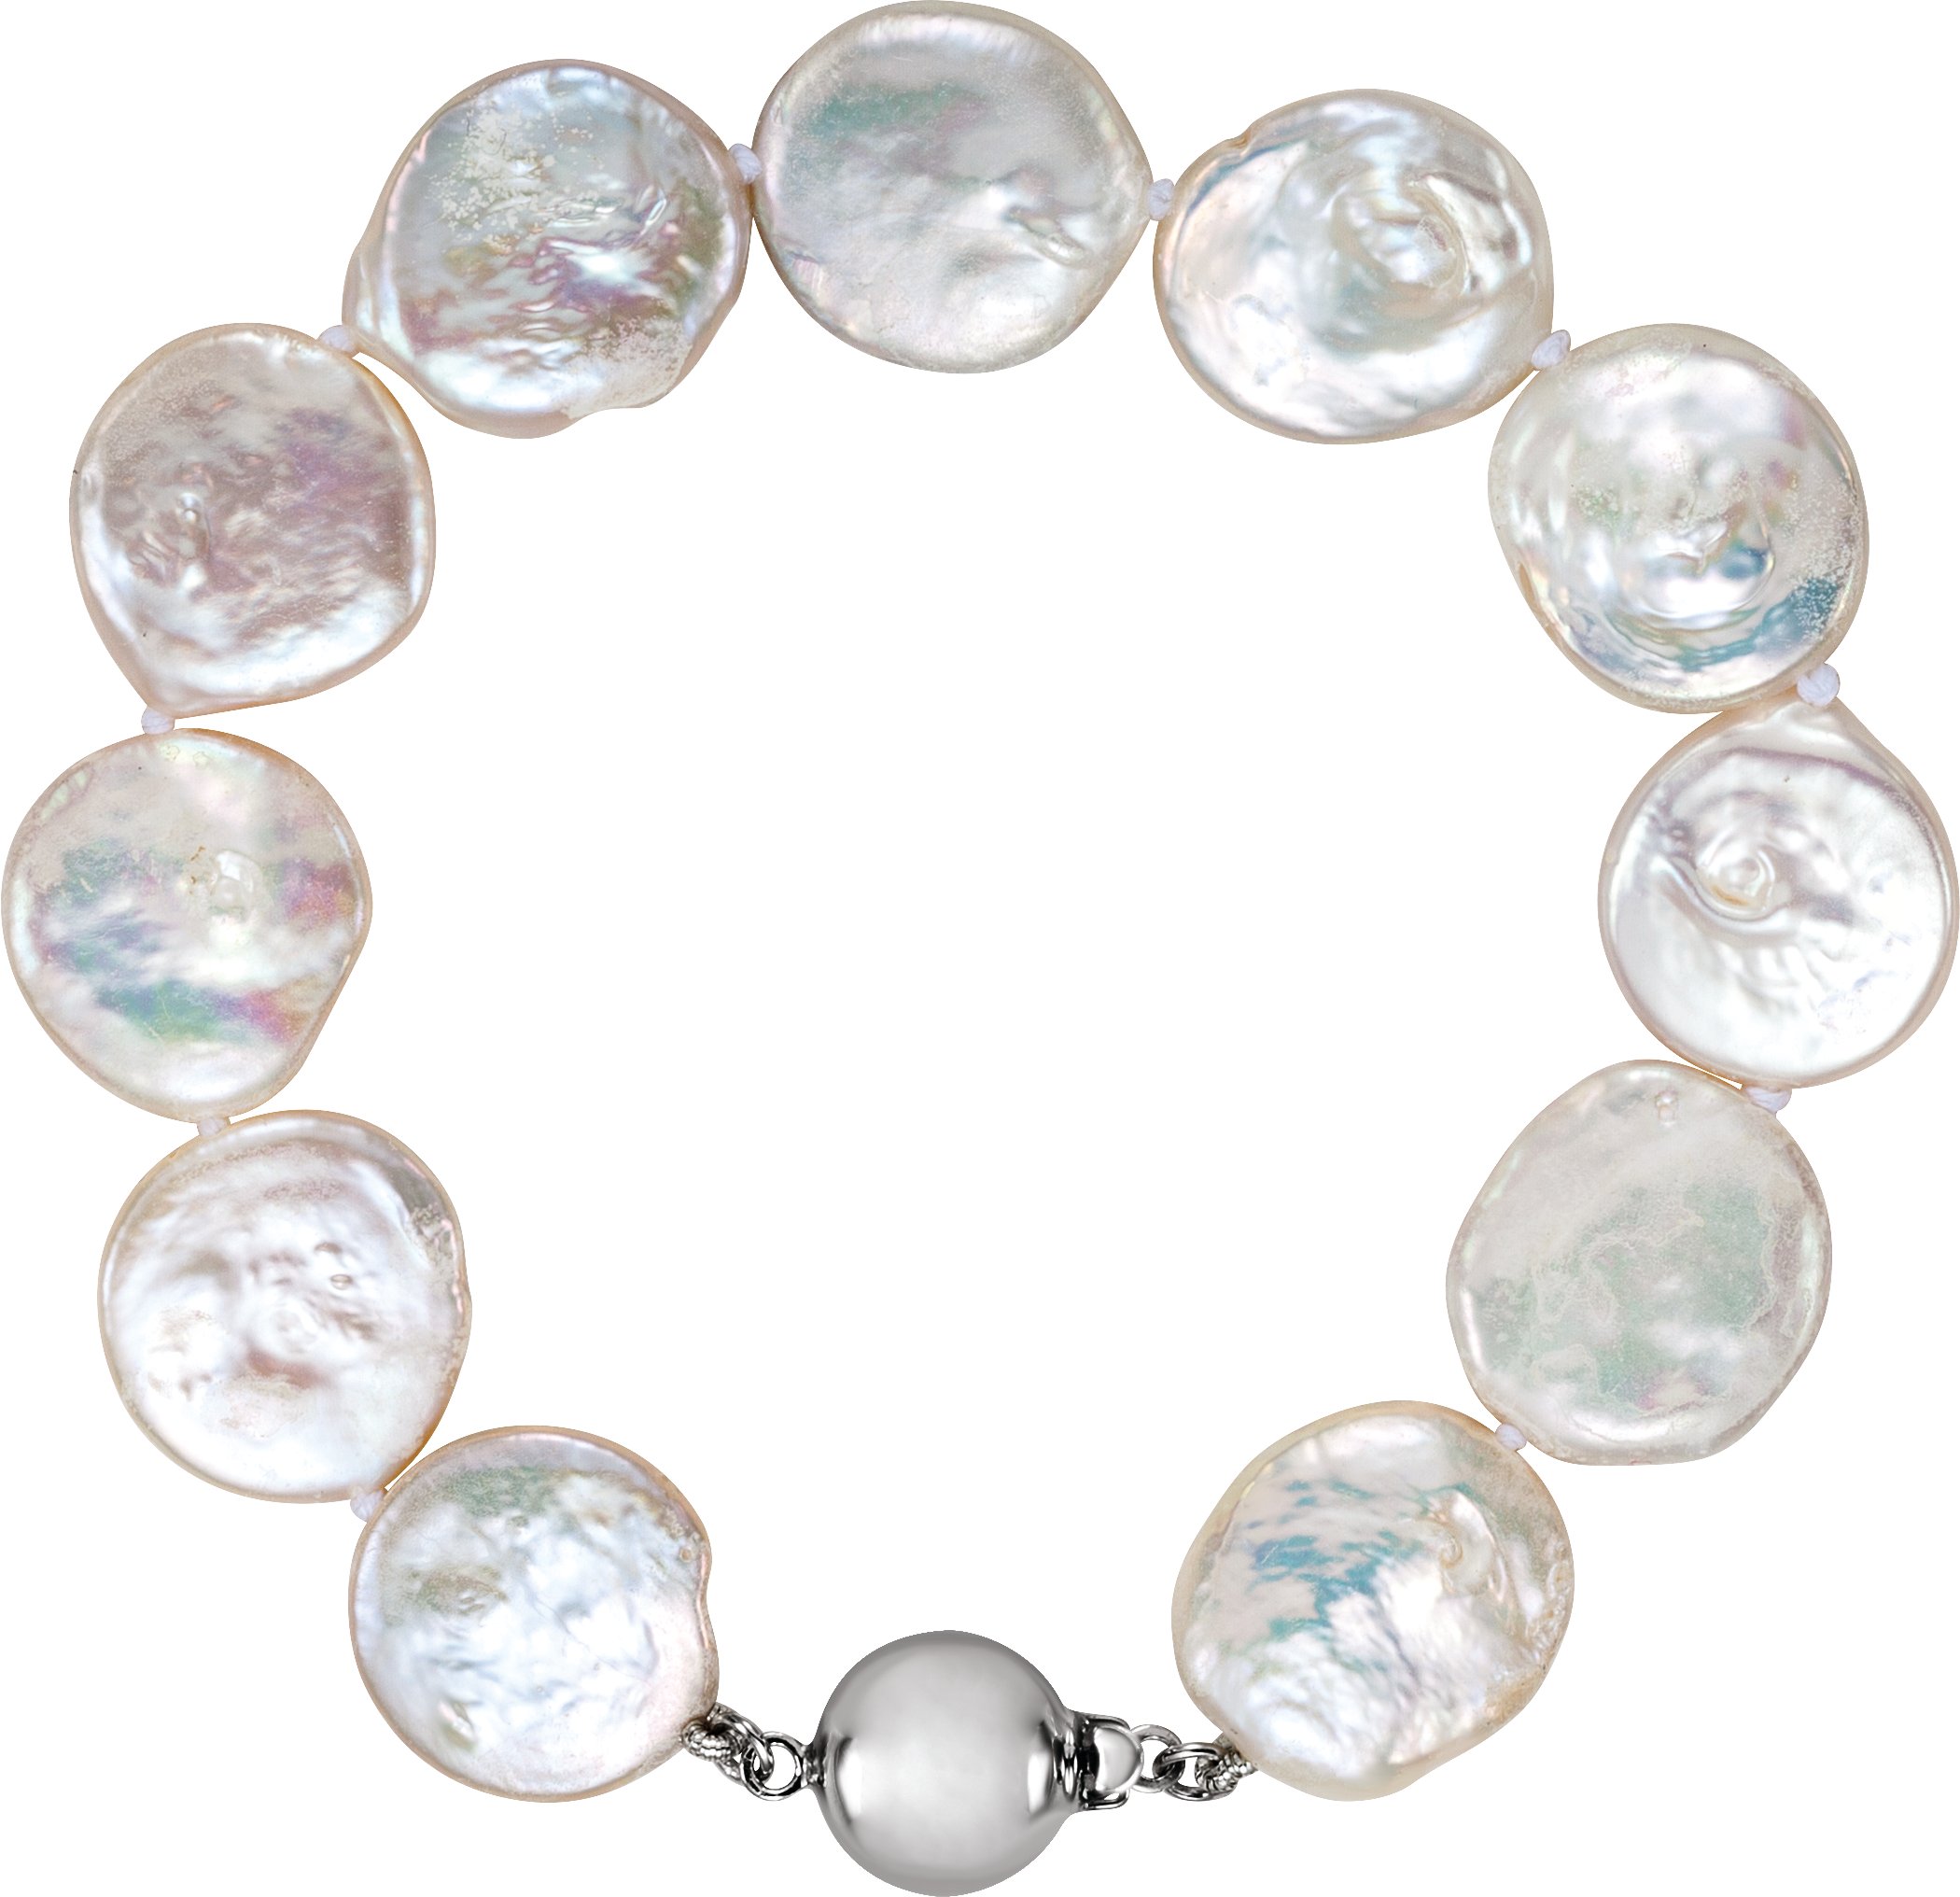 Sterling Silver White Freshwater Cultured Coin Pearl 7.75 inch Bracelet Ref. 2625091